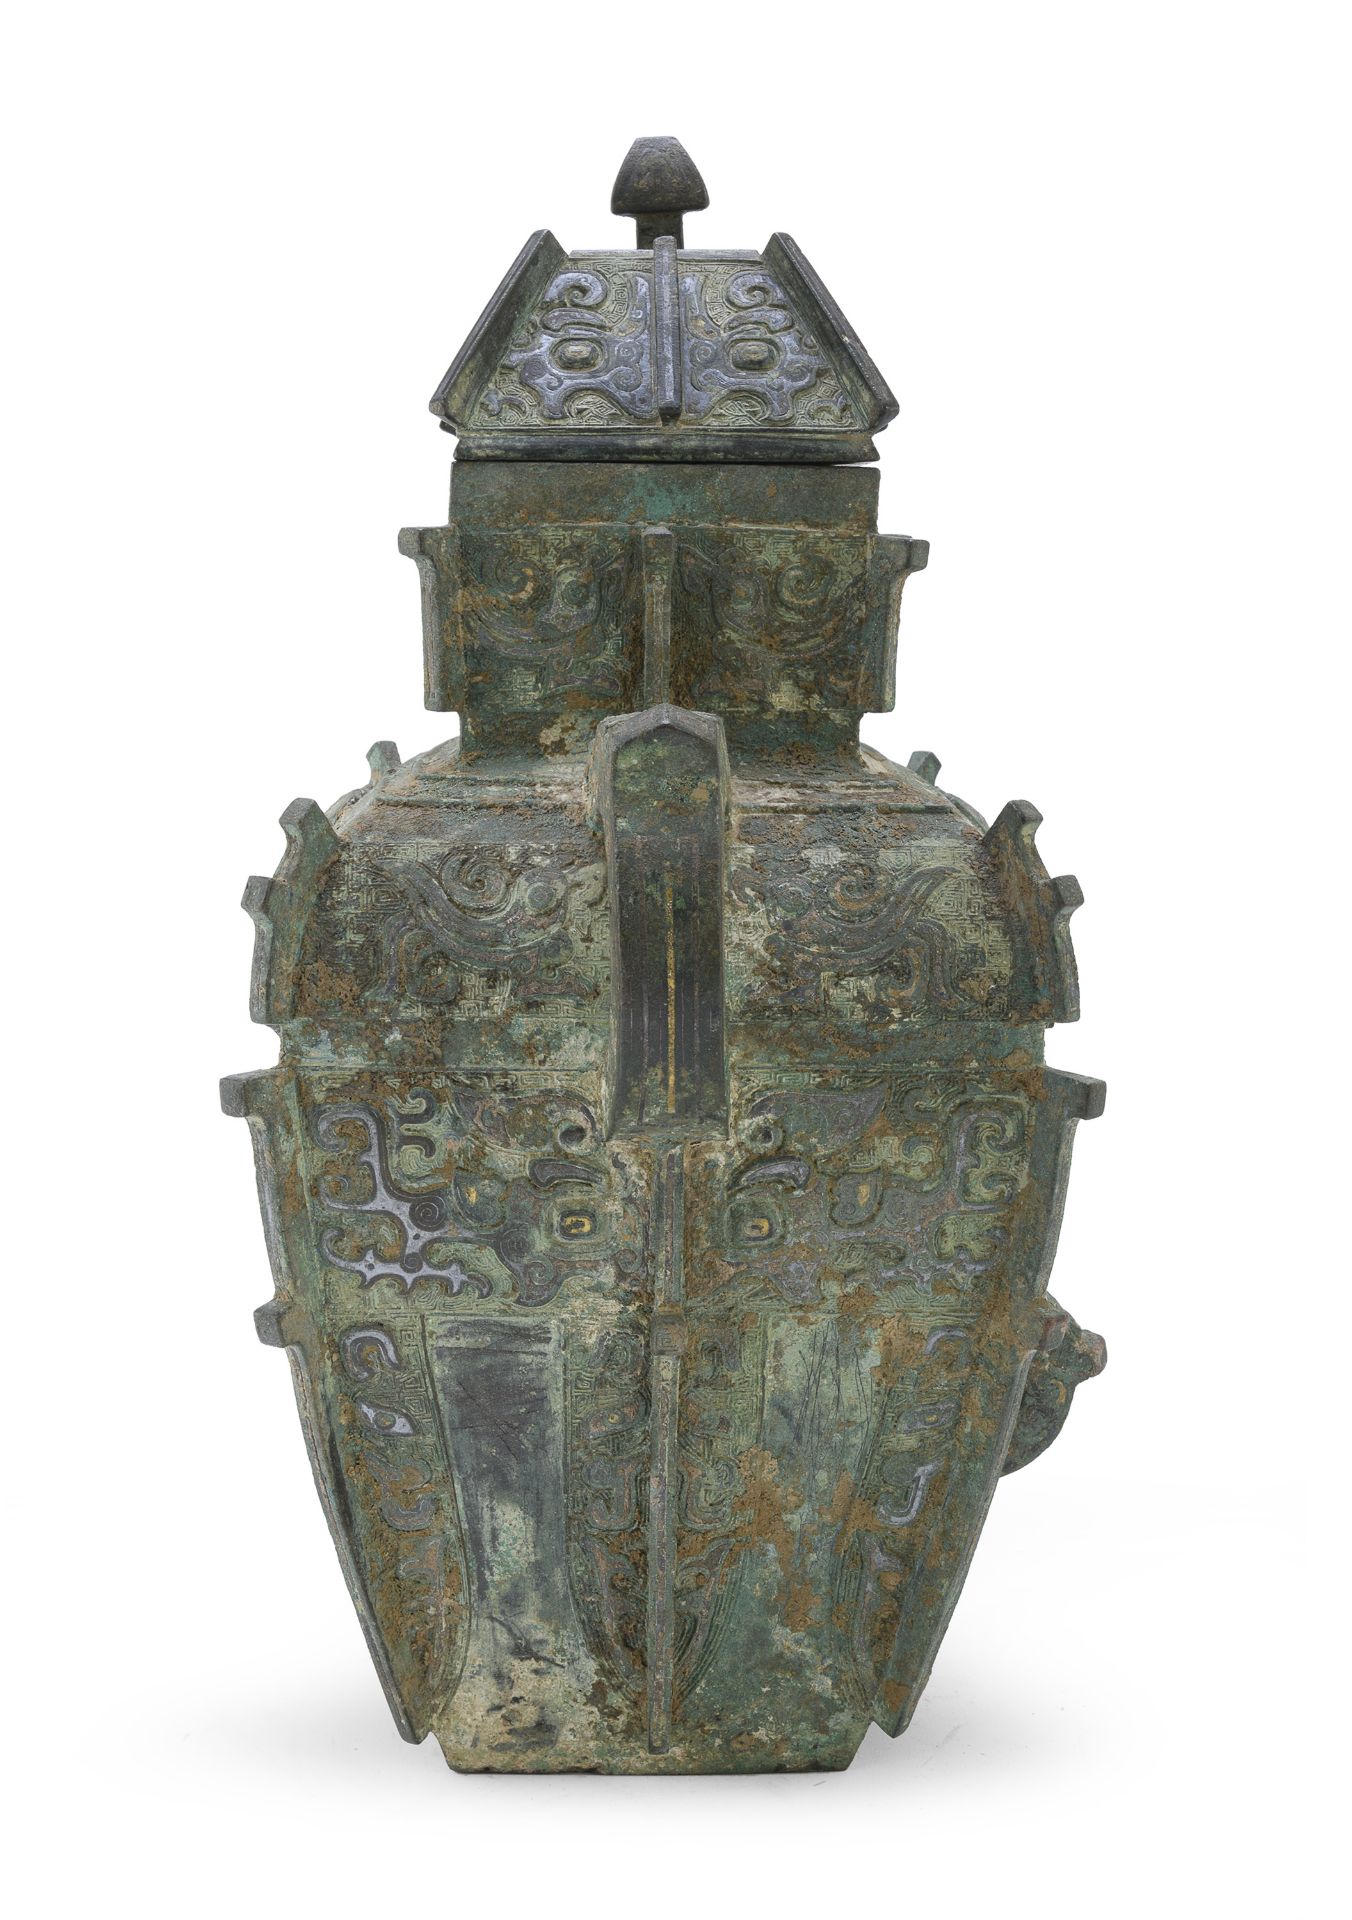 A VERY RARE AND IMPORTANT BRONZE RITUAL WINE VESSEL CHINA 13TH-14TH CENTURY - Image 2 of 7